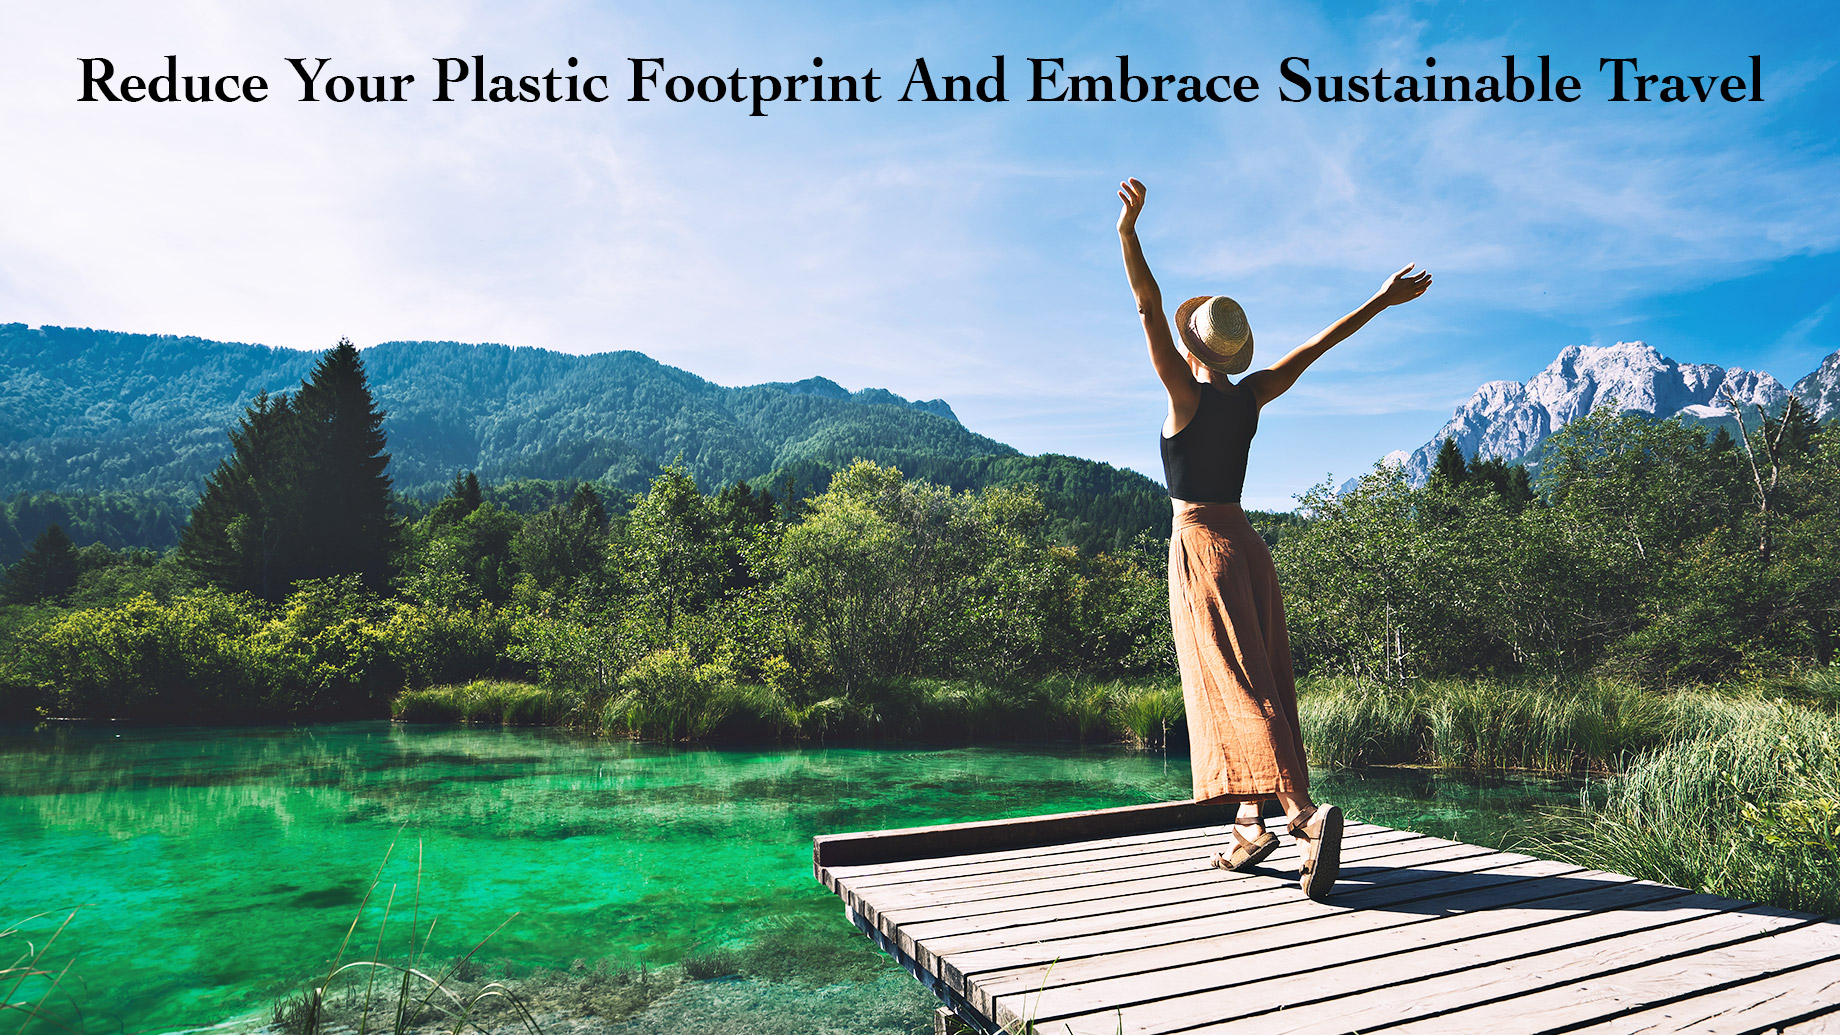 Reduce Your Plastic Footprint And Embrace Sustainable Travel